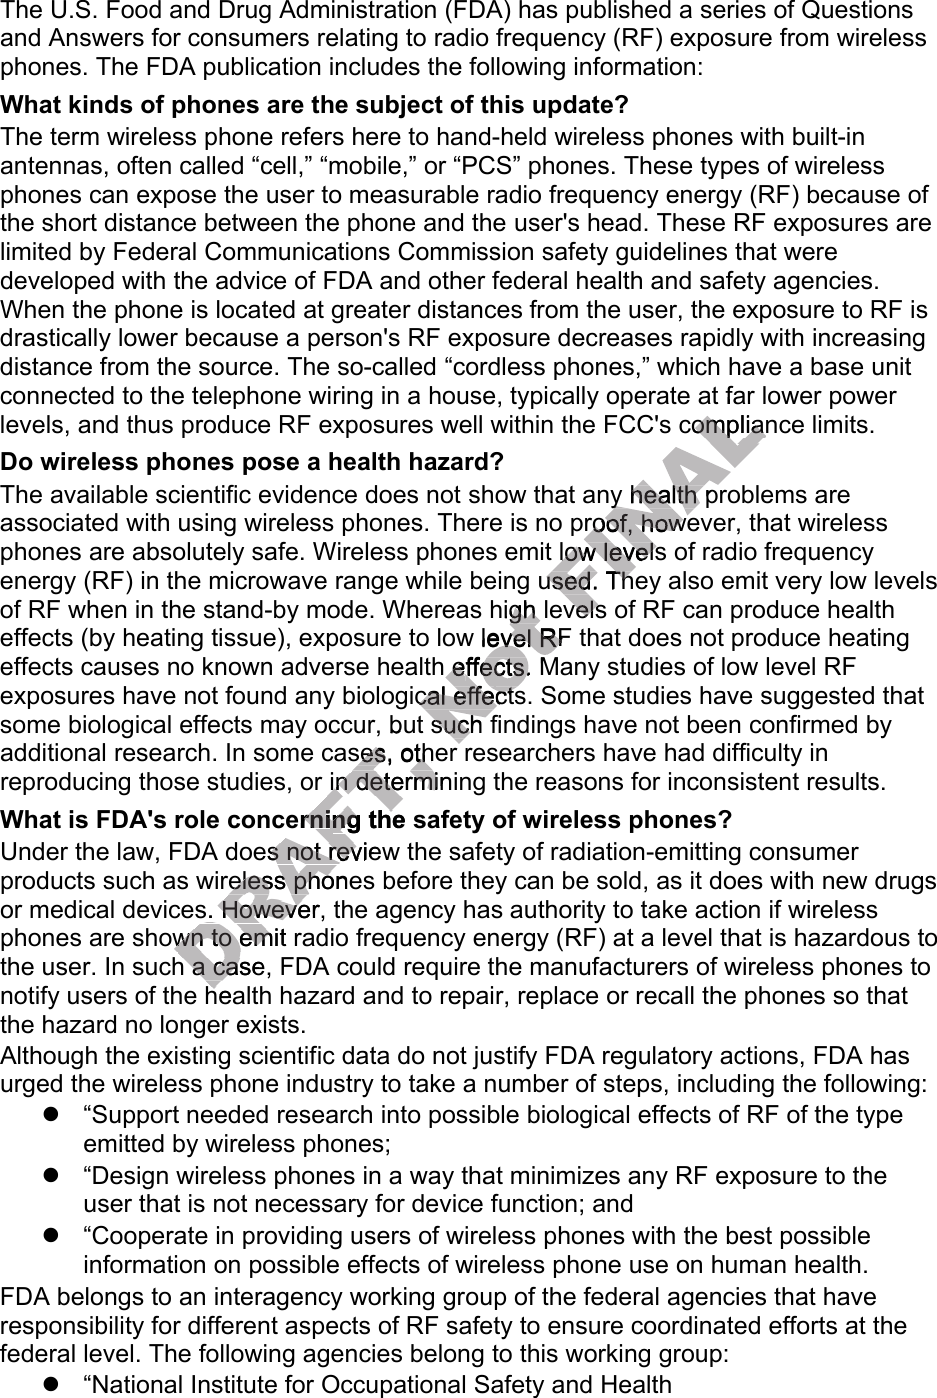 The U.S. Food and Drug Administration (FDA) has published a series of Questions and Answers for consumers relating to radio frequency (RF) exposure from wireless phones. The FDA publication includes the following information:What kinds of phones are the subject of this update?The term wireless phone refers here to hand-held wireless phones with built-in antennas, often called “cell,” “mobile,” or “PCS” phones. These types of wireless phones can expose the user to measurable radio frequency energy (RF) because of the short distance between the phone and the user&apos;s head. These RF exposures are limited by Federal Communications Commission safety guidelines that were developed with the advice of FDA and other federal health and safety agencies. When the phone is located at greater distances from the user, the exposure to RF is drastically lower because a person&apos;s RF exposure decreases rapidly with increasing distance from the source. The so-called “cordless phones,” which have a base unit connected to the telephone wiring in a house, typically operate at far lower power levels, and thus produce RF exposures well within the FCC&apos;s compliance limits.Do wireless phones pose a health hazard?The available scientific evidence does not show that any health problems are associated with using wireless phones. There is no proof, however, that wireless phones are absolutely safe. Wireless phones emit low levels of radio frequency energy (RF) in the microwave range while being used. They also emit very low levels of RF when in the stand-by mode. Whereas high levels of RF can produce health effects (by heating tissue), exposure to low level RF that does not produce heating effects causes no known adverse health effects. Many studies of low level RF exposures have not found any biological effects. Some studies have suggested that some biological effects may occur, but such findings have not been confirmed by additional research. In some cases, other researchers have had difficulty in reproducing those studies, or in determining the reasons for inconsistent results.What is FDA&apos;s role concerning the safety of wireless phones?Under the law, FDA does not review the safety of radiation-emitting consumer products such as wireless phones before they can be sold, as it does with new drugs or medical devices. However, the agency has authority to take action if wireless phones are shown to emit radio frequency energy (RF) at a level that is hazardous to the user. In such a case, FDA could require the manufacturers of wireless phones to notify users of the health hazard and to repair, replace or recall the phones so that the hazard no longer exists.Although the existing scientific data do not justify FDA regulatory actions, FDA has urged the wireless phone industry to take a number of steps, including the following:“Support needed research into possible biological effects of RF of the typeemitted by wireless phones;“Design wireless phones in a way that minimizes any RF exposure to theuser that is not necessary for device function; and“Cooperate in providing users of wireless phones with the best possibleinformation on possible effects of wireless phone use on human health.FDA belongs to an interagency working group of the federal agencies that have responsibility for different aspects of RF safety to ensure coordinated efforts at the federal level. The following agencies belong to this working group:“National Institute for Occupational Safety and HealthDRAFT,  in determining the reasons for inconsistent results. in determining the reasons for inconsistent results.What is FDA&apos;s role concerniWhat is FDA&apos;s role concerning the safetyng the safety does not review does not revieproducts such as wireless phones before theyproducts such as wireless phones before theyor medical devices. However, the agency hasor medical devices. However, the agency hasphones are shown to emit radio frequency energyphones are shown to emit radio frequency energysuch a case, FDA such a case, notify users of the health haznotify users of the health hazy occur, but such findings y occur, but such findings additional research. In some cases, additional research. In some cases, other researchers have had difficulty in other researchers have had difficulty in Under the law, FDA does not review the Under the law, FDA does not review the products such as wireless phones before they can be sold, as it does with new drugs products such as wireless phones before they can be sold, as it does with new drugs of RF when in the stand-by mode. Whereas high levels of RF can produce health of RF when in the stand-by mode. Whereas high levels of RF can produce health effects (by heating tissue), exposure to low effects (by heating tissue), exposure to low level RF that does not produce heating level RF that does not produce heating effects causes no known adverse health eeffects causes no known adverse health effects. Many studies of low level RF ffects. Many studies of low level RF exposures have not found any biological effeexposures have not found any biological effects. Some studies have suggested that cts. Some studies have suggested that y occur, but such findings y occur, but such findings other researchers have had difficulty in other researchers have had difficulty in FINAL typically operate at far lower power CC&apos;s compliance limits.CC&apos;s compliance limits. show that any health problems are  show that any health problems are e is no proof, however, that wireless e is no proof, however, that wireless emit low levels of radio frequency emit low levels of radio frequency energy (RF) in the microwave range while being used. They also emit very low levels energy (RF) in the microwave range while being used. They also emit very low levels of RF when in the stand-by mode. Whereas high levels of RF can produce health of RF when in the stand-by mode. Whereas high levels of RF can produce health 